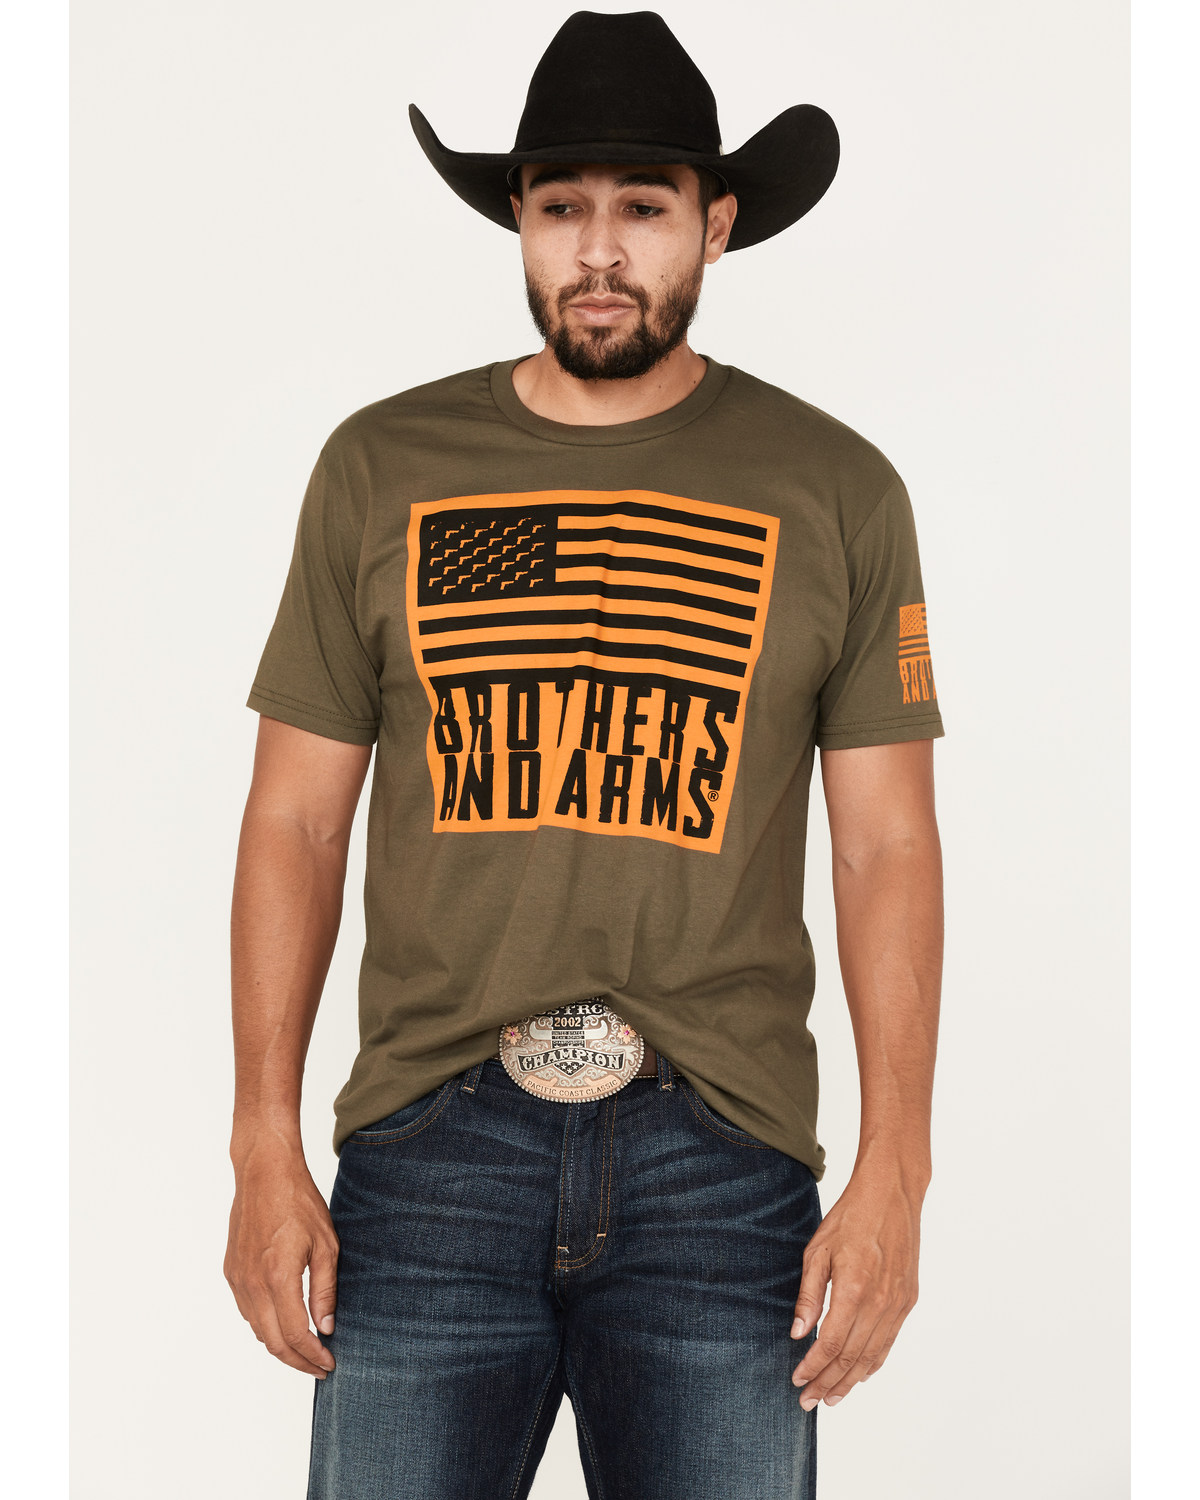 Brothers & Arms Flag Logo Graphic T-Shirt